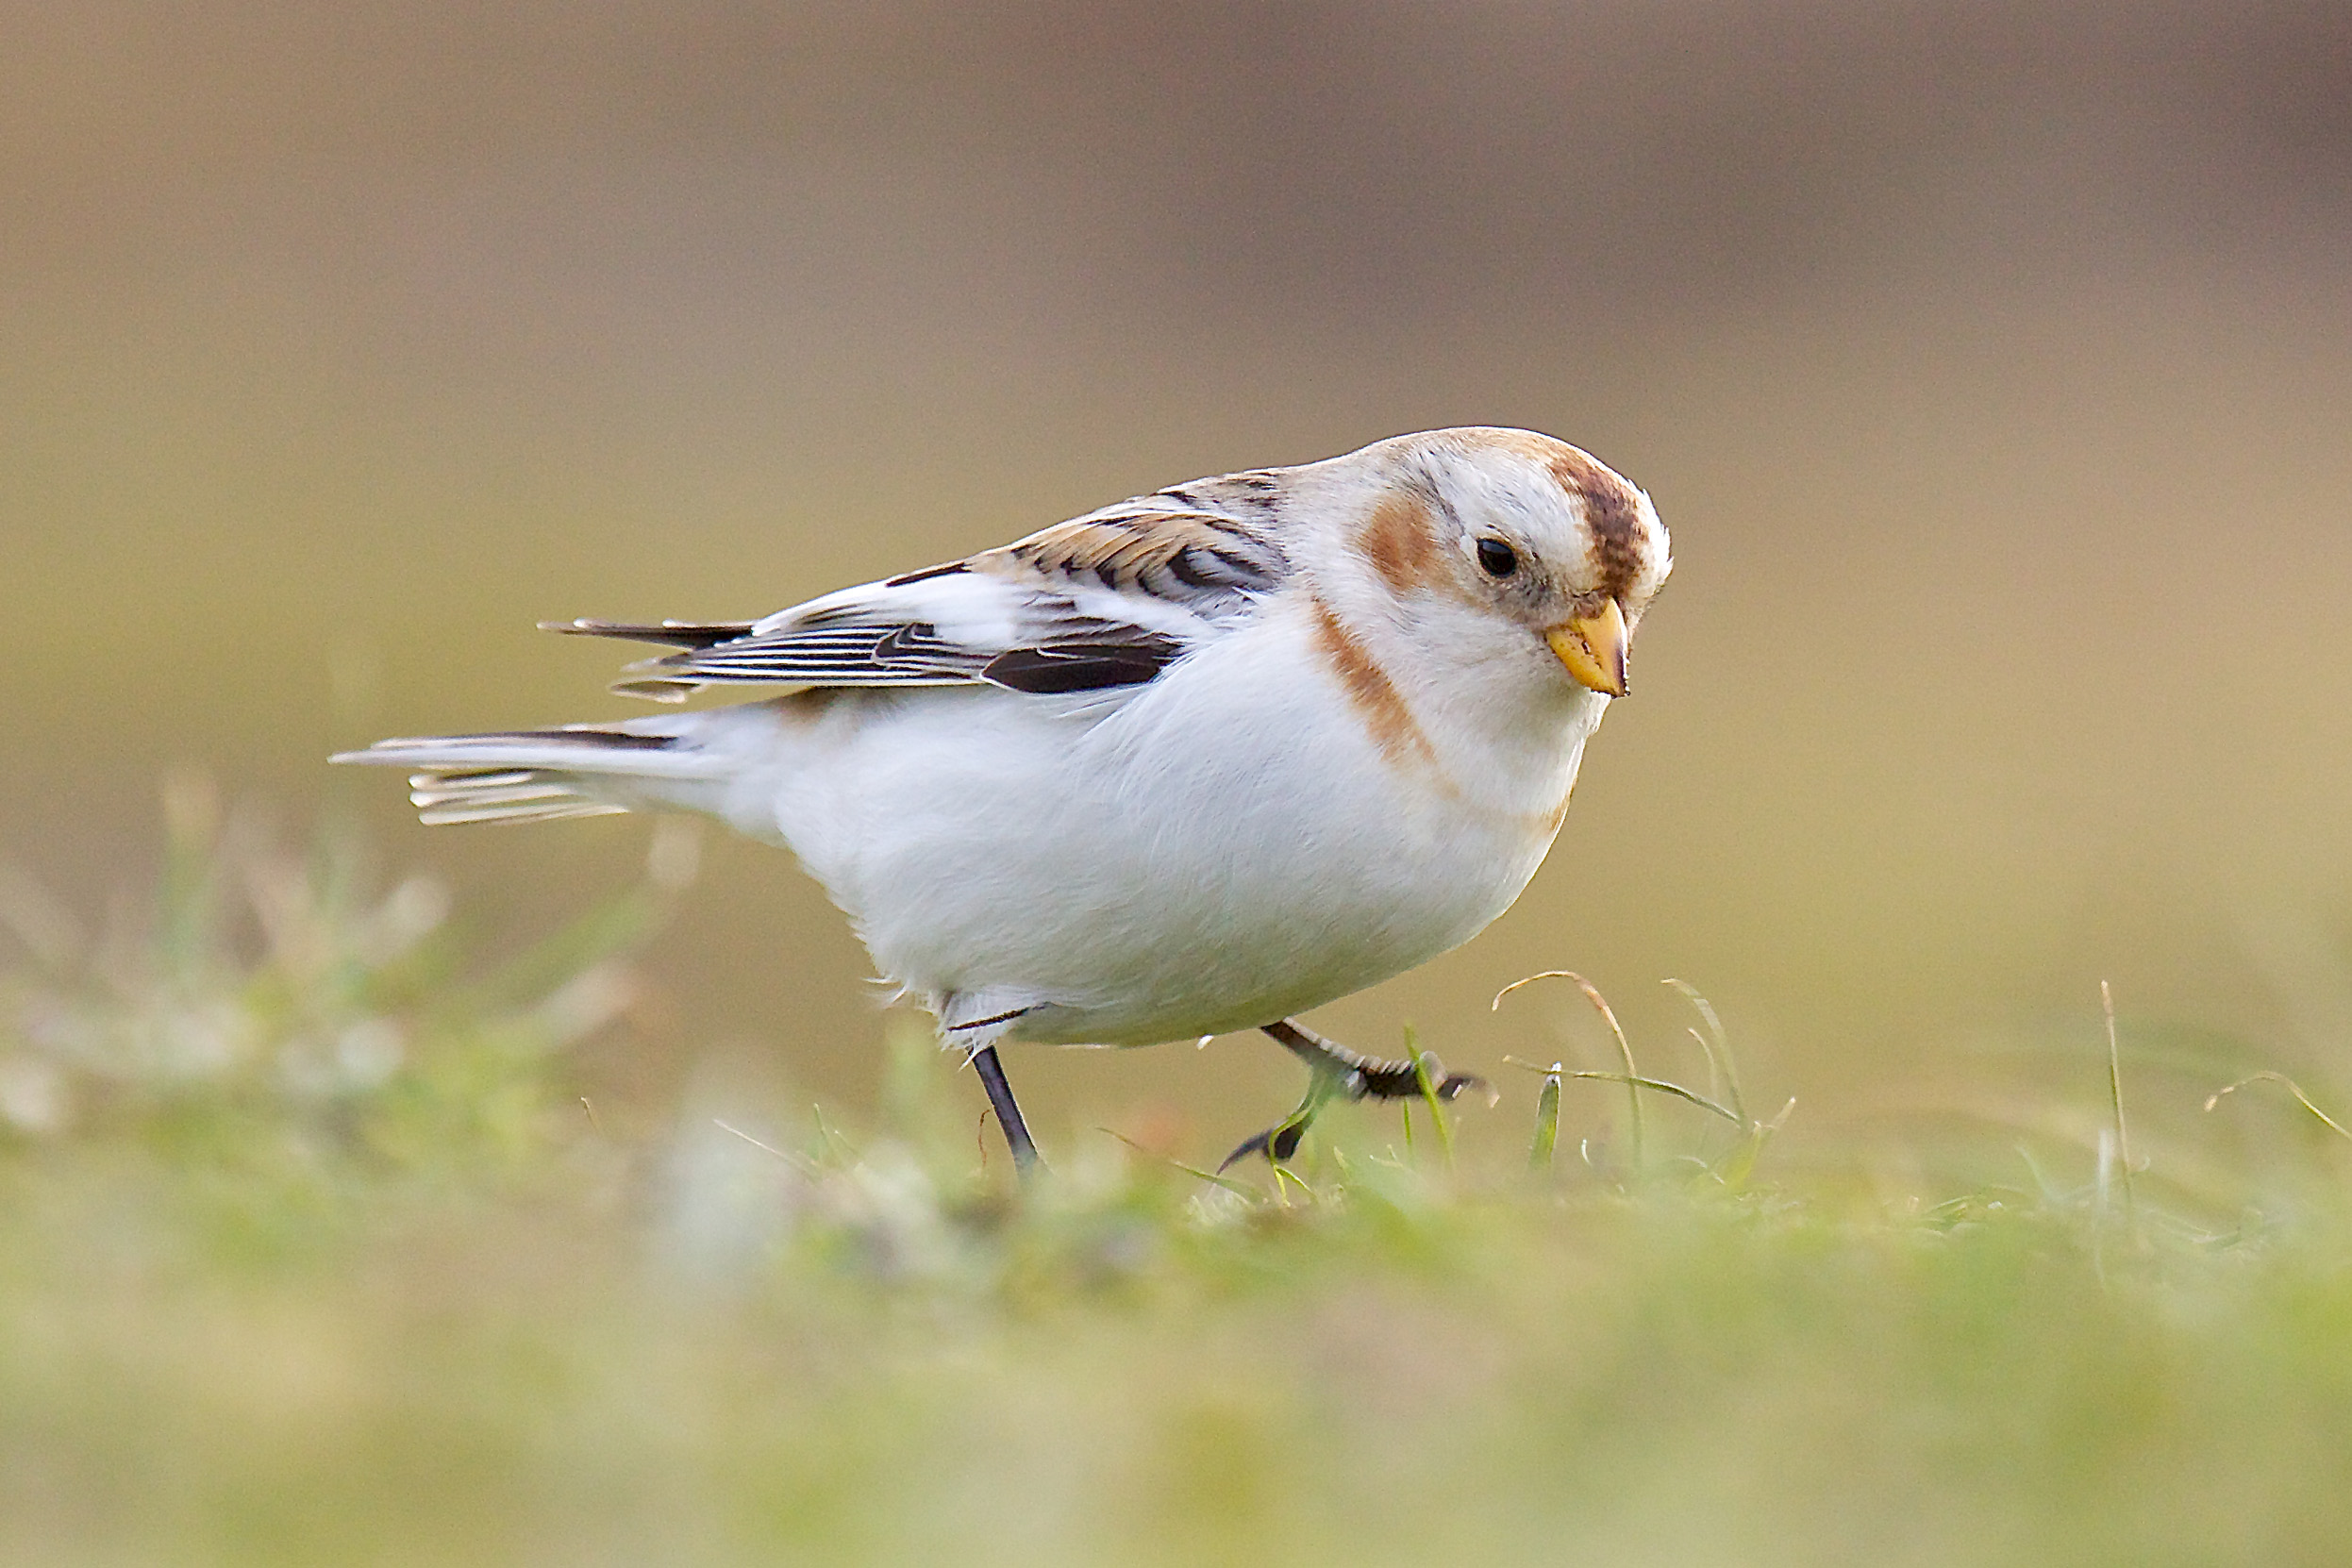 A Snow Bunting walking on grass.